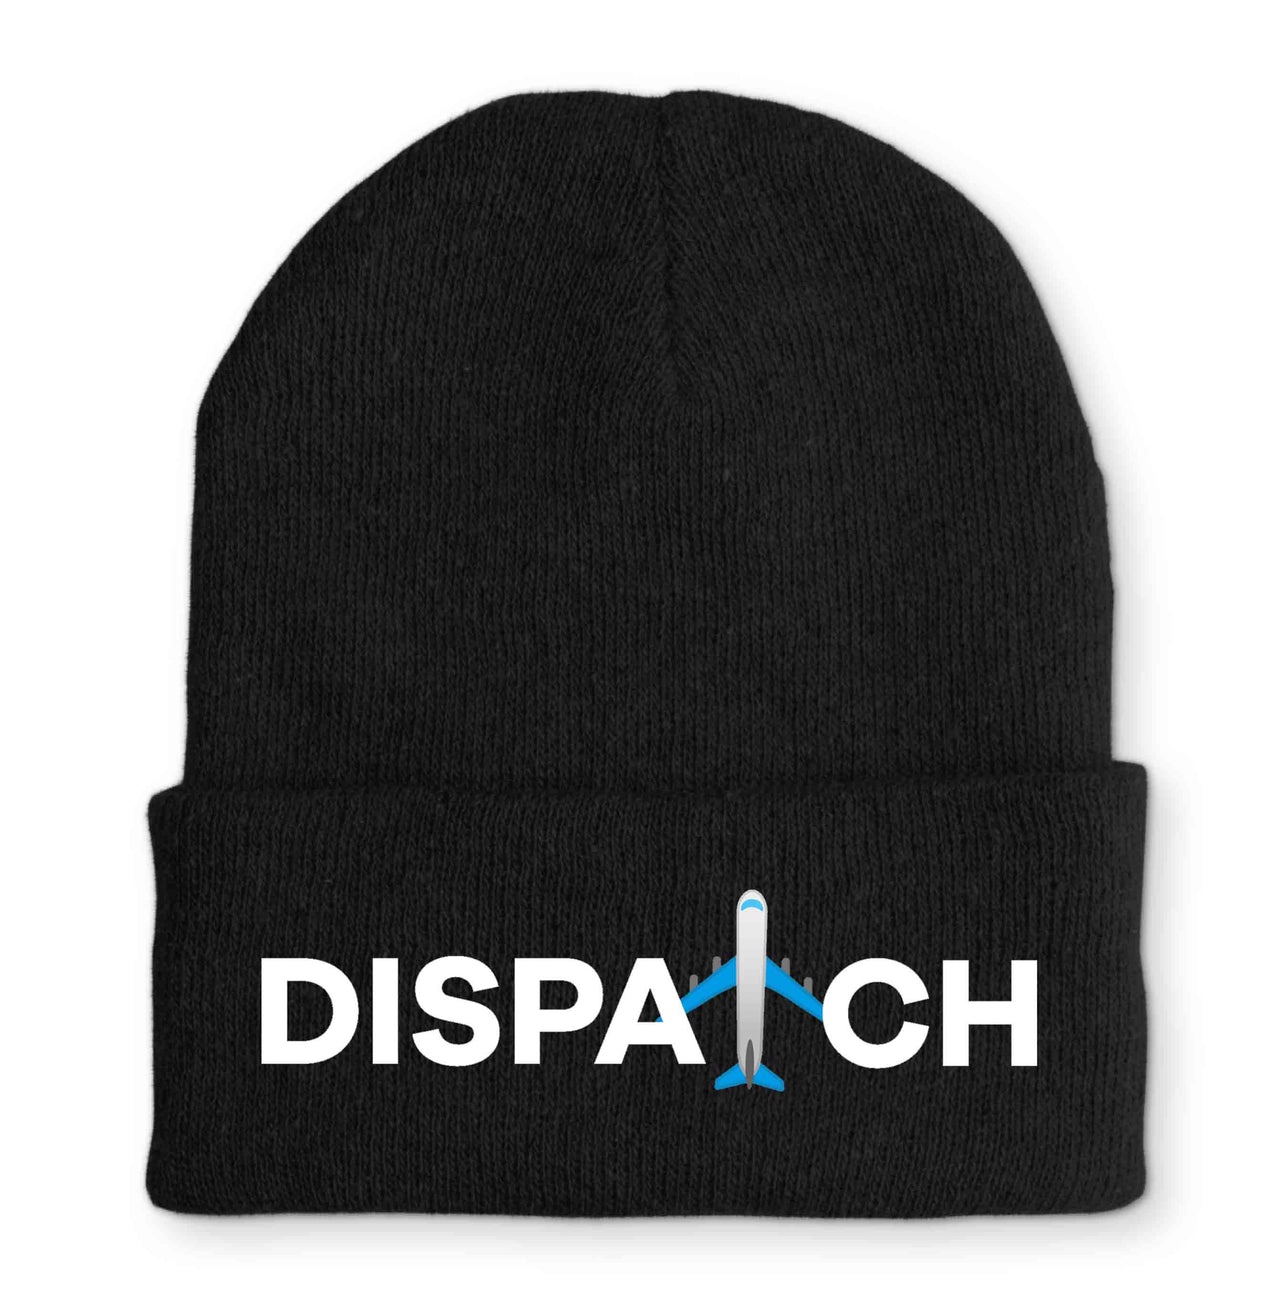 Dispatch Embroidered Beanies